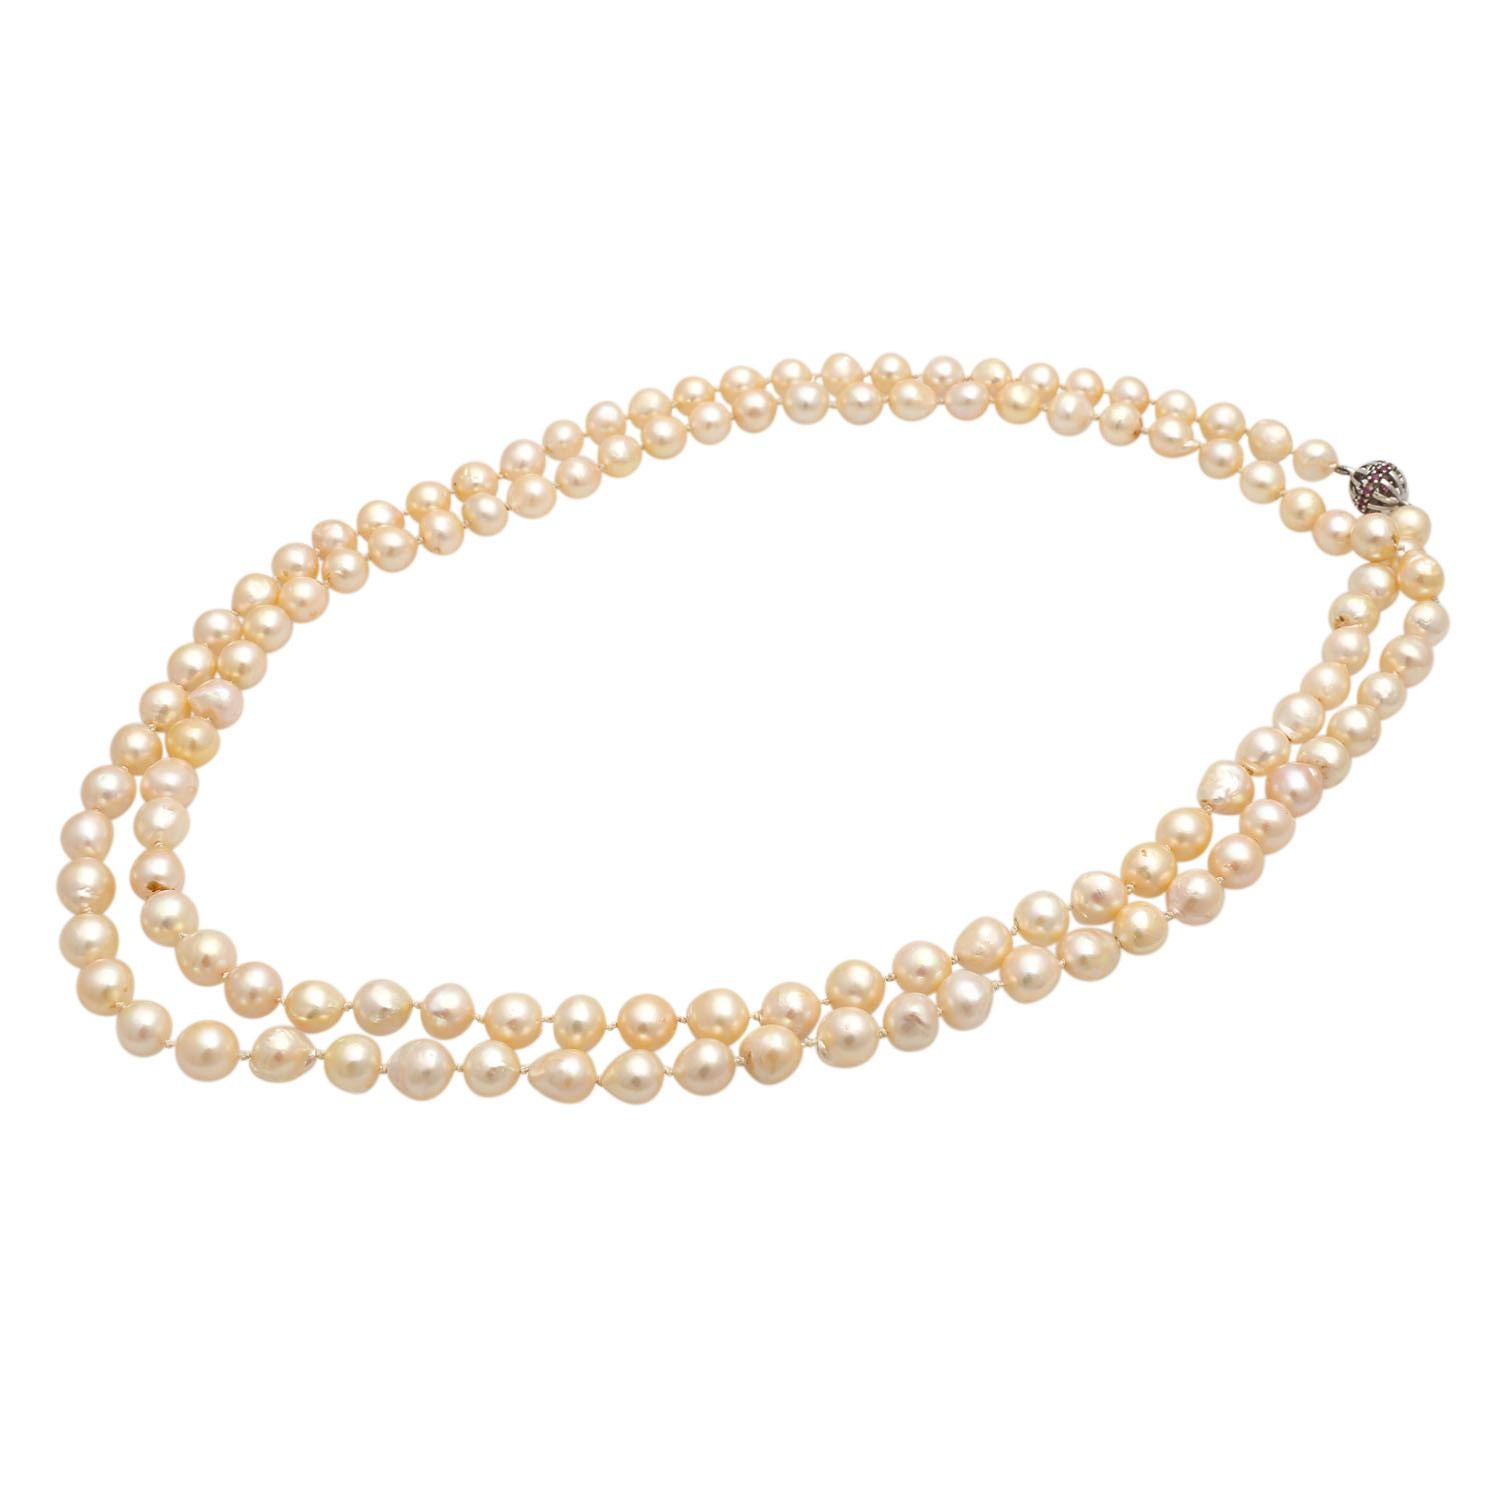 Modern Long Necklace of Akoya Pearls For Sale